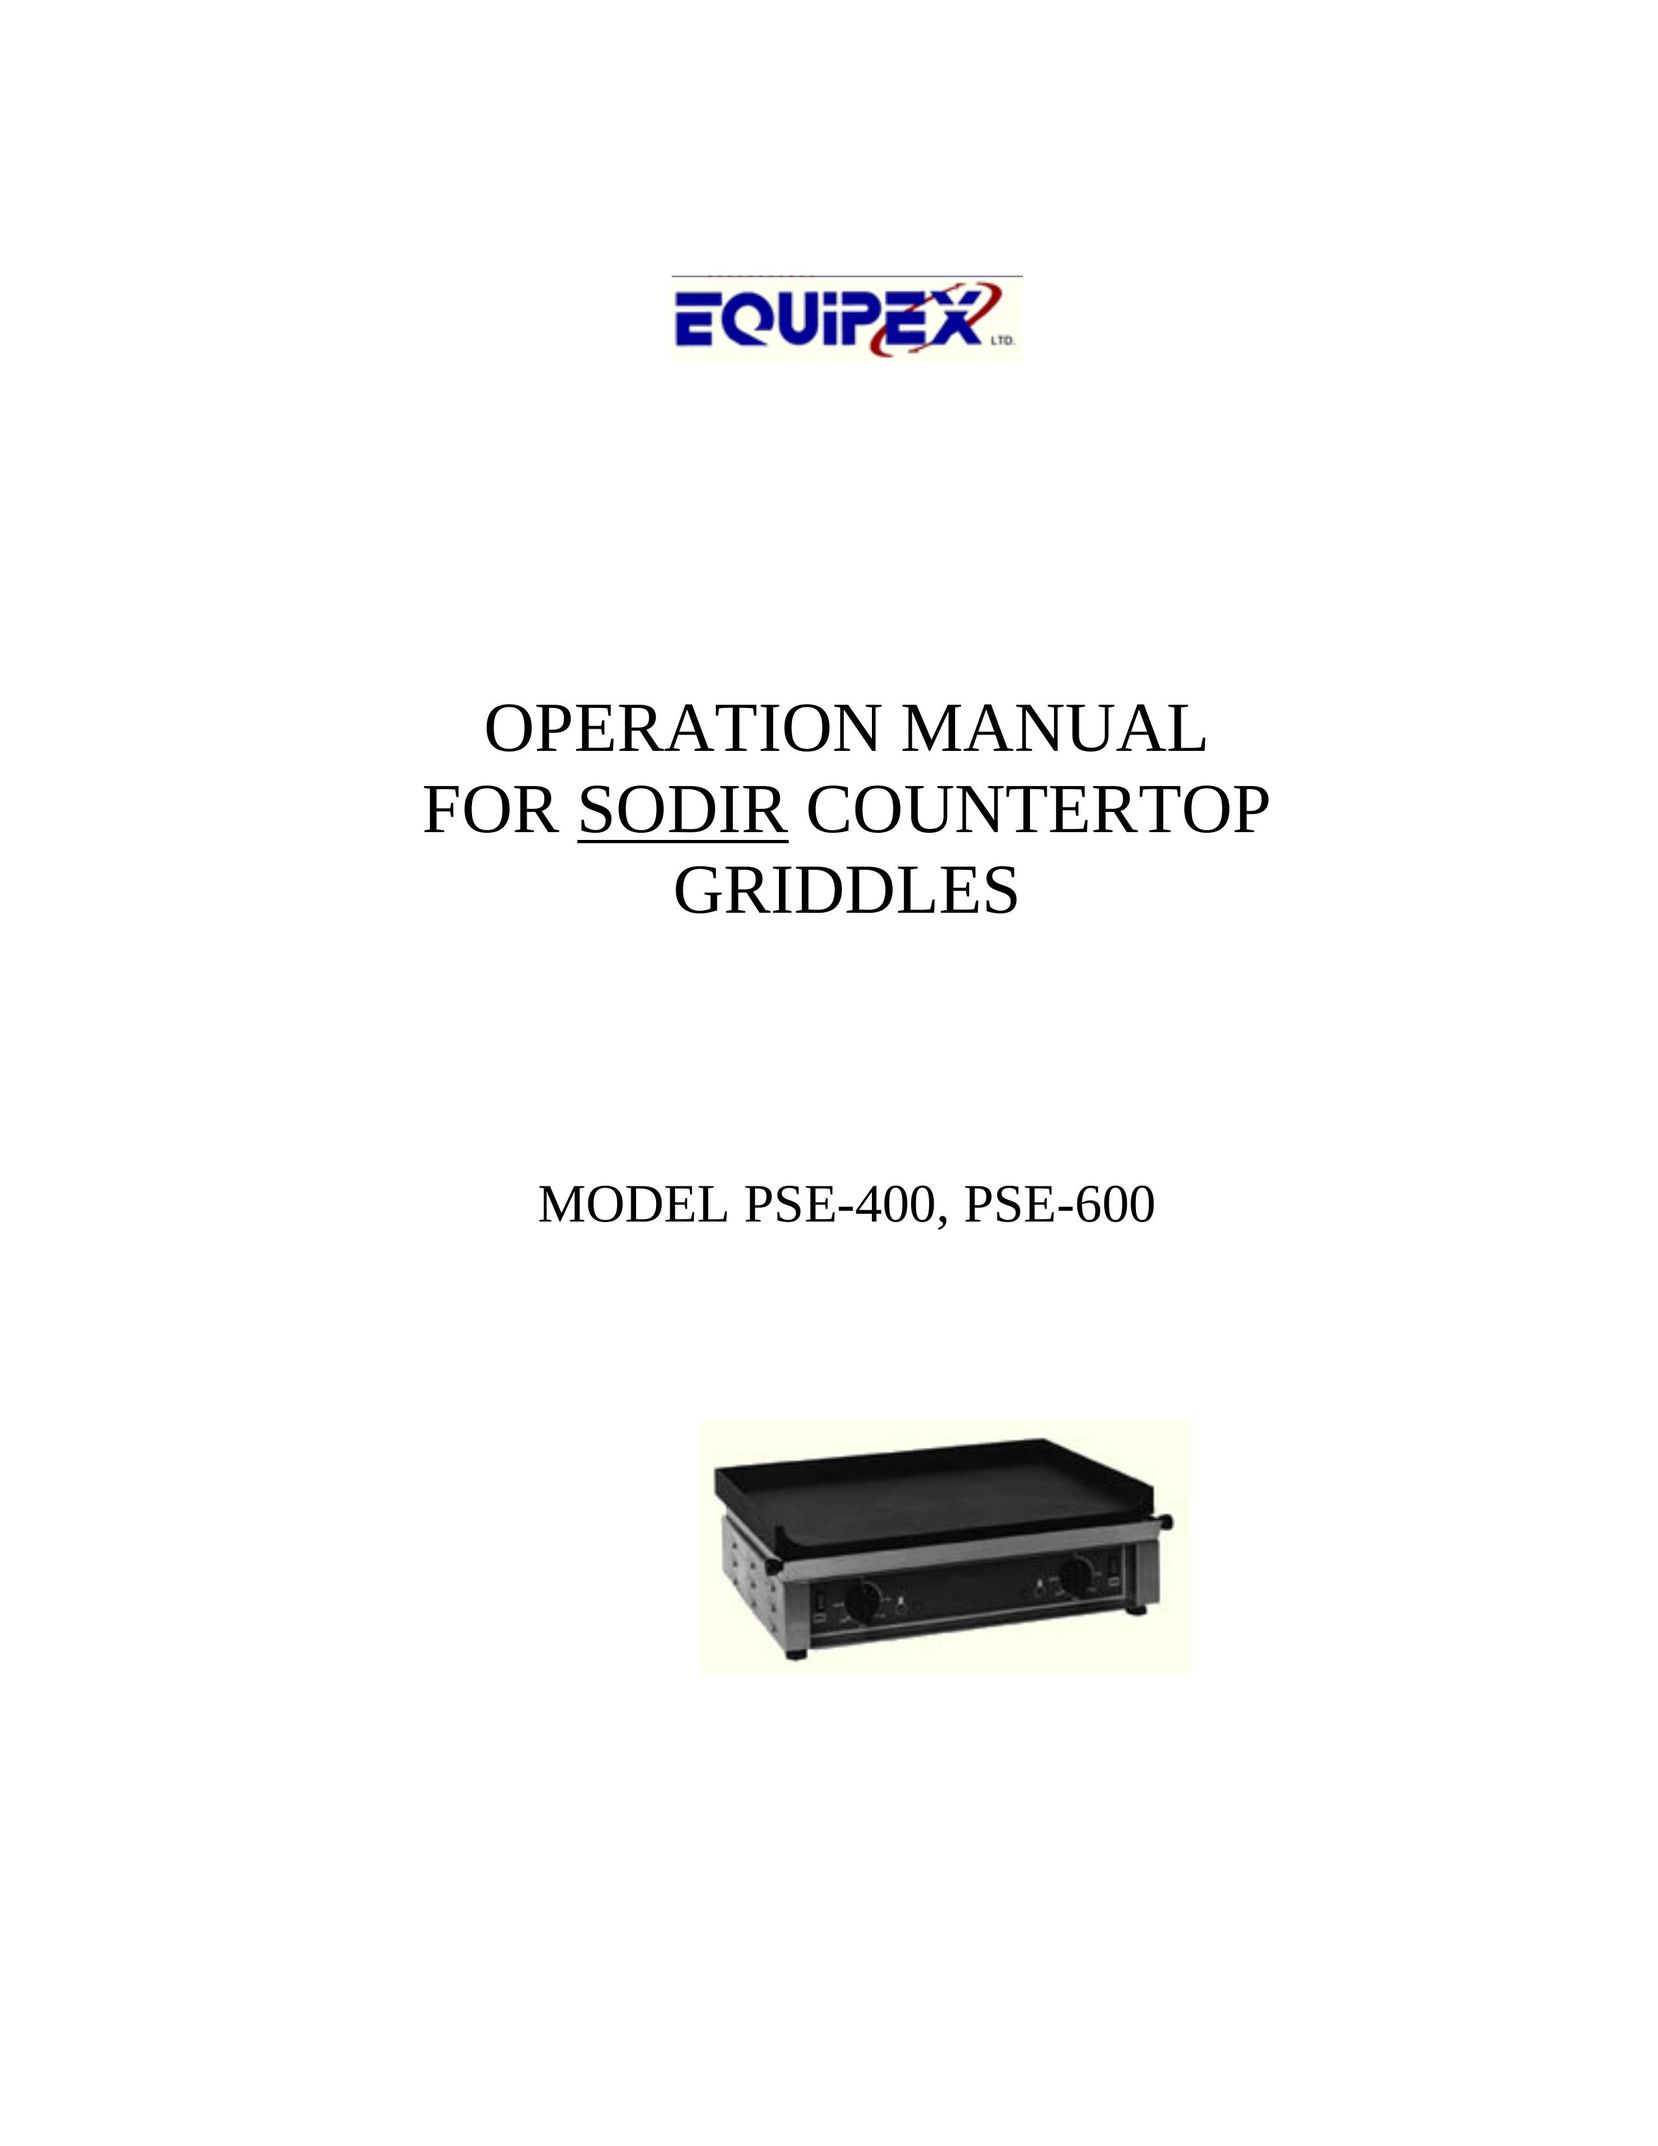 Equipex PSE-400, PSE-600 Griddle User Manual